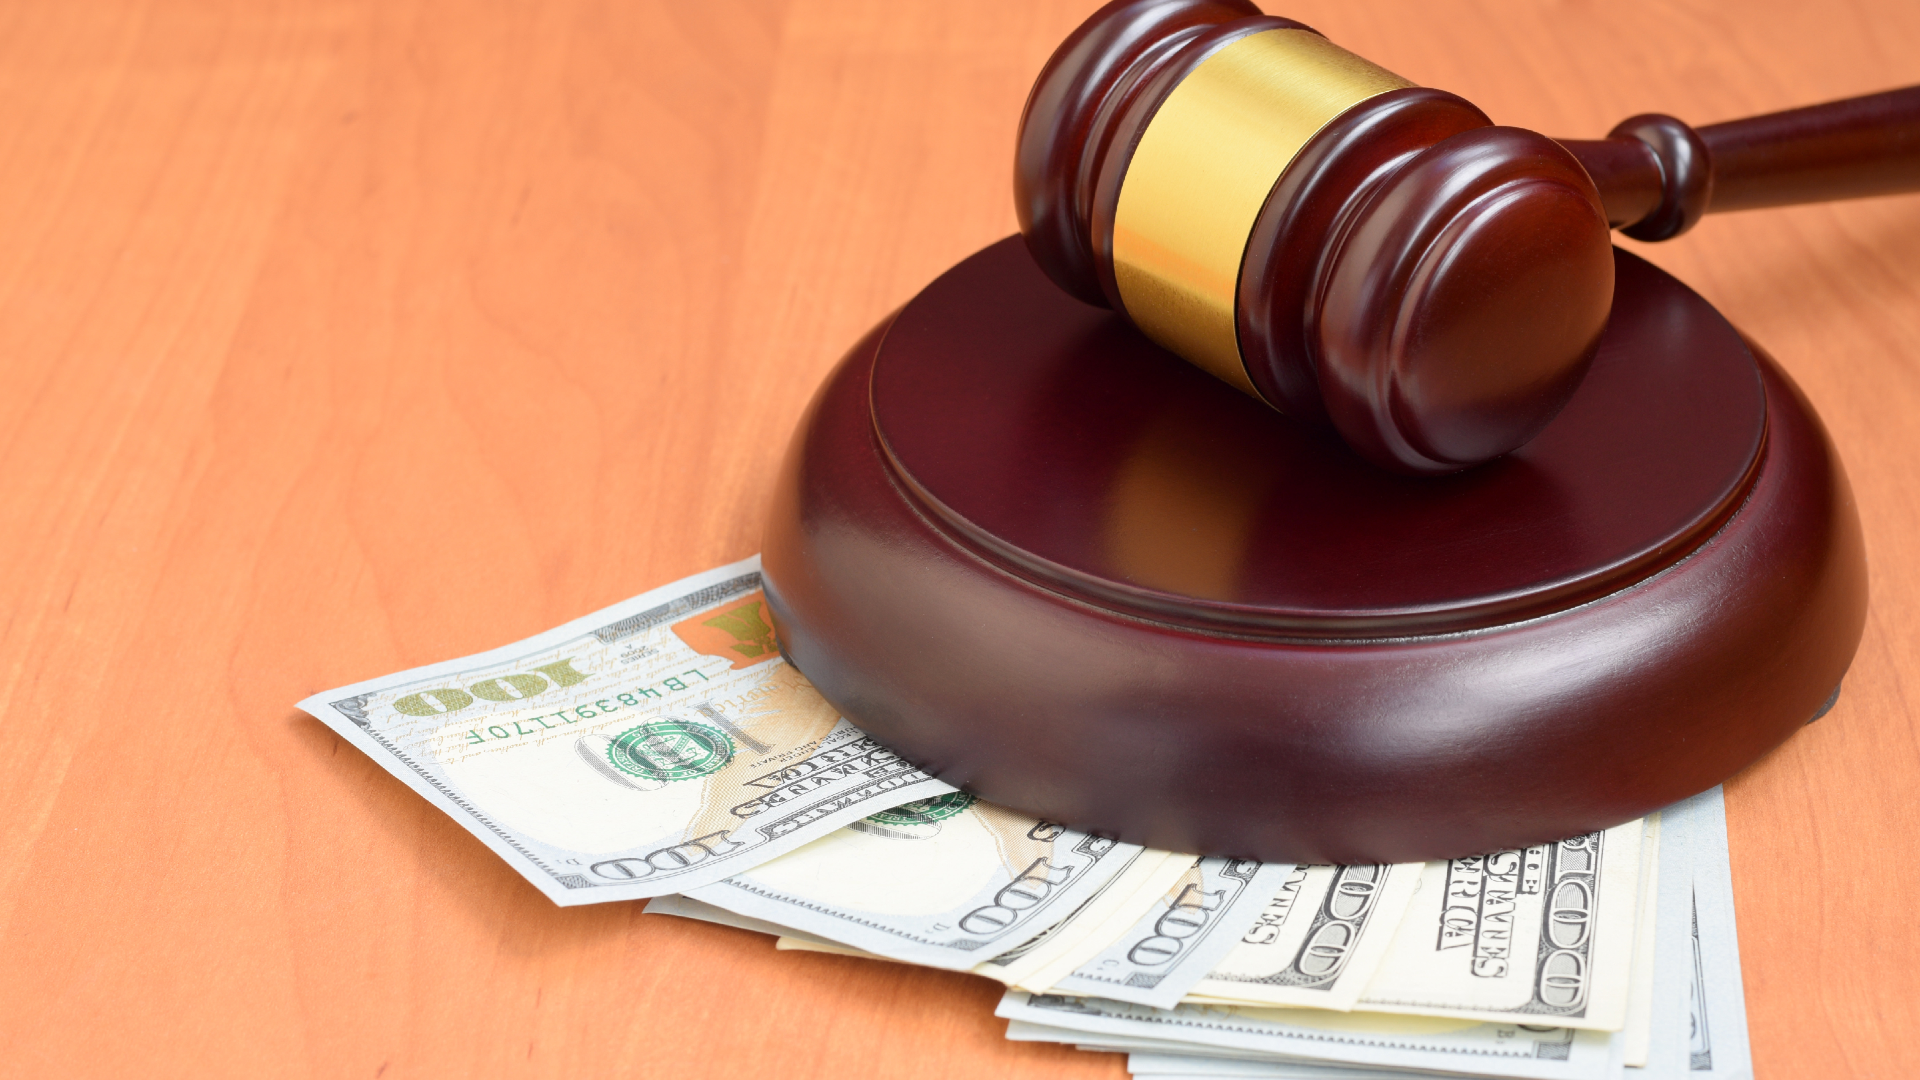 A judge’s gavel sits on top of a pile of $100 bills